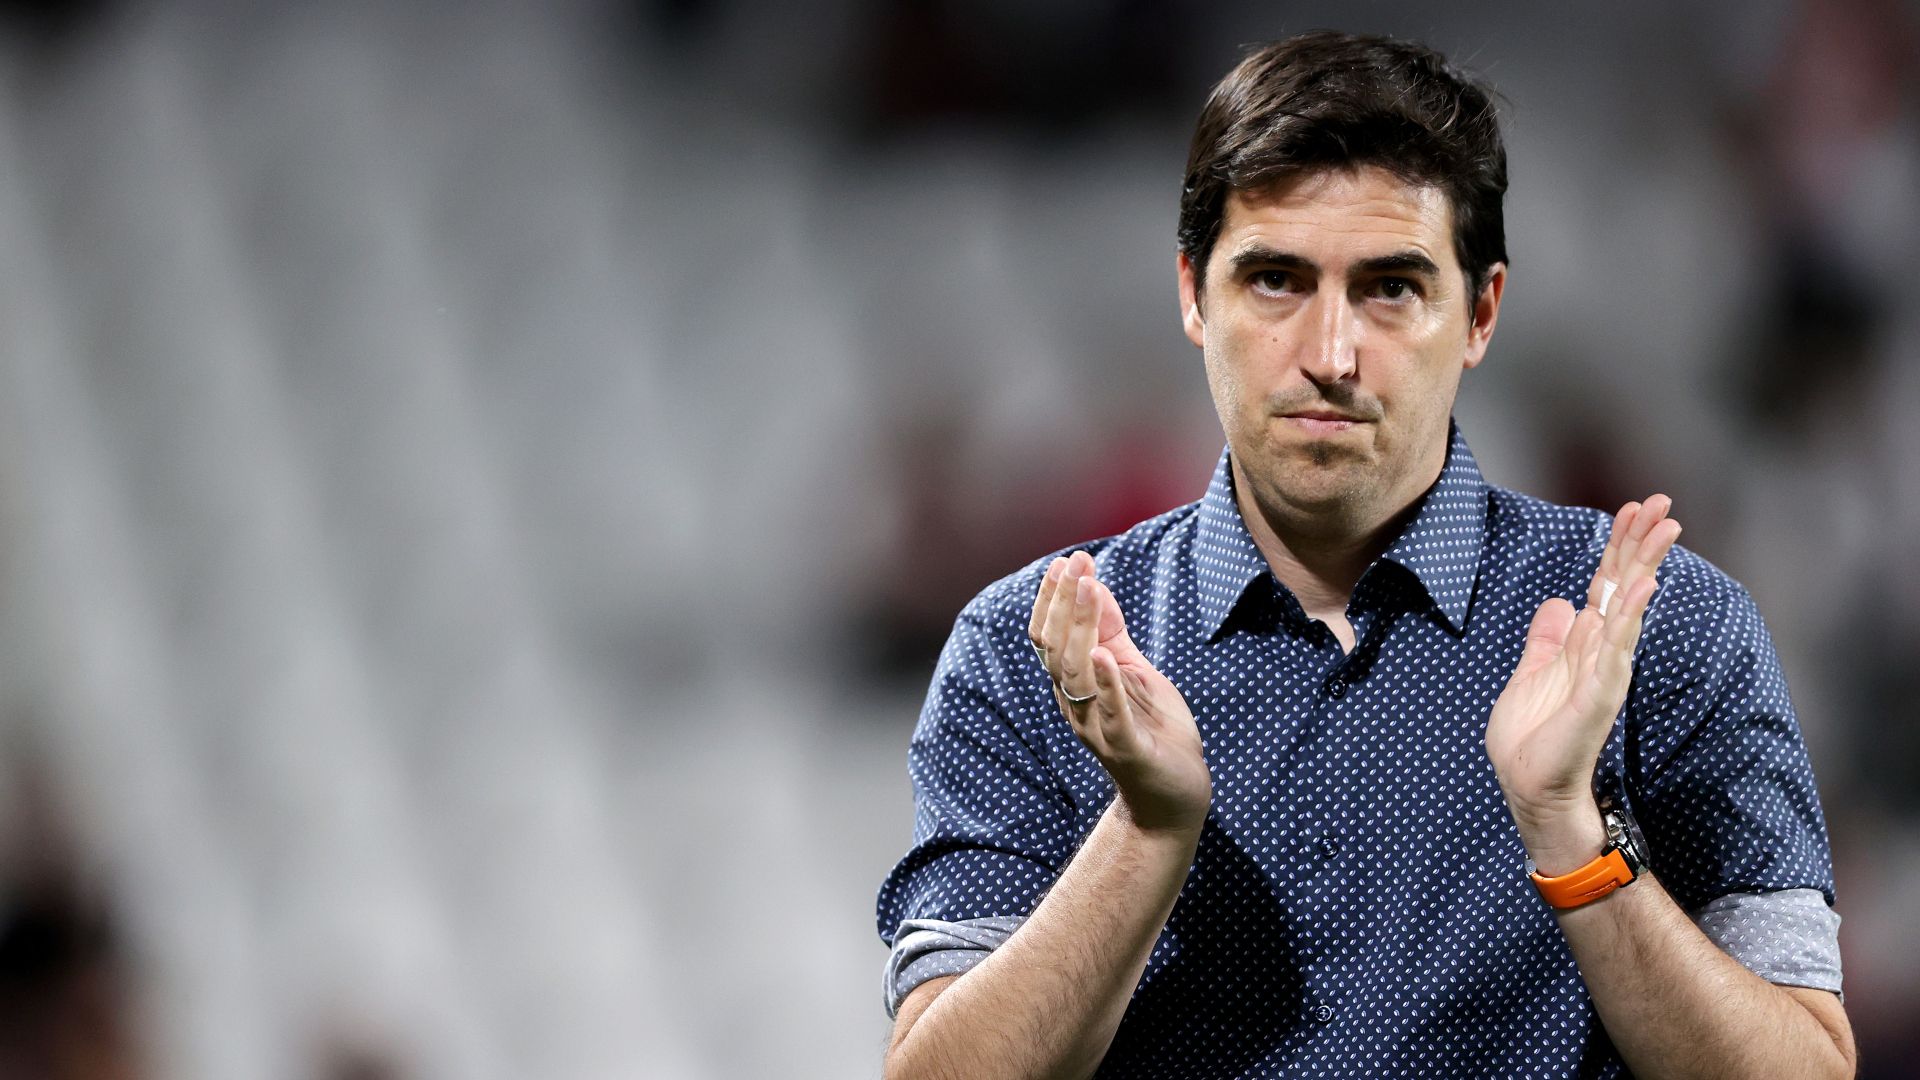 Bournemouth appoint Andoni Iraola as manager after sacking Gary O